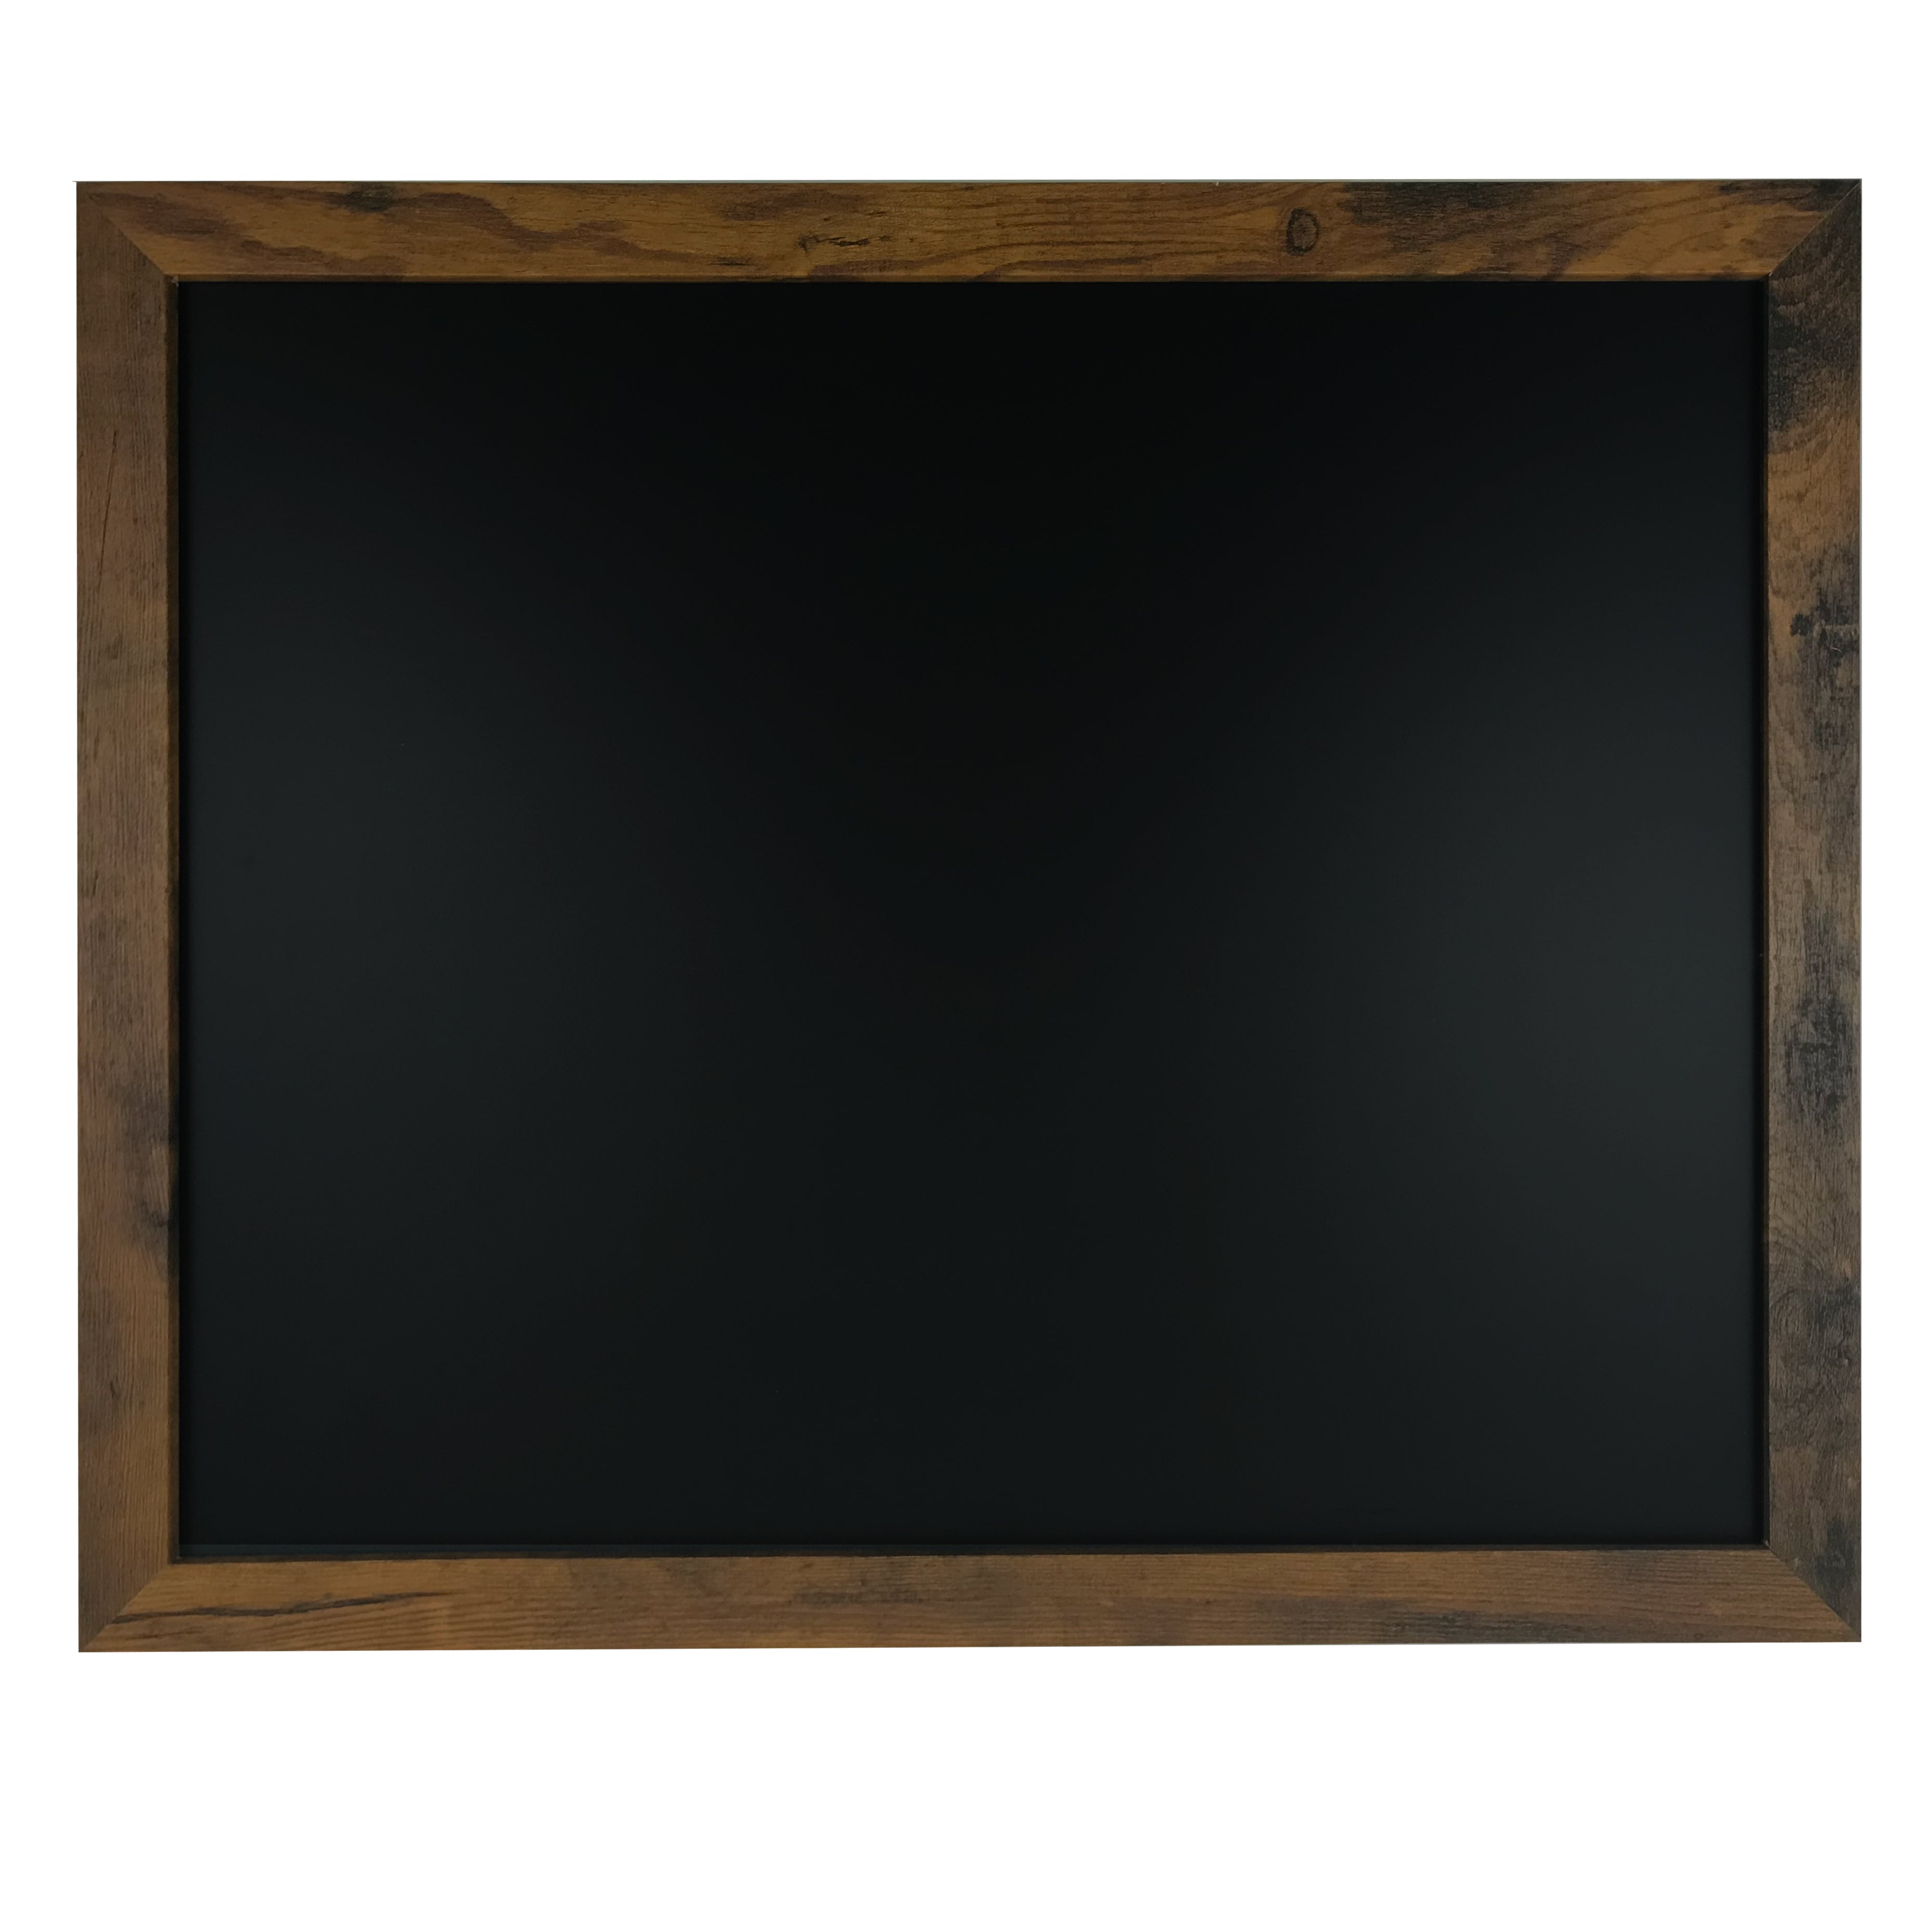 DOCMON Chalkboard Signs, 12 x 16 Rustic Magnetic A-Frame